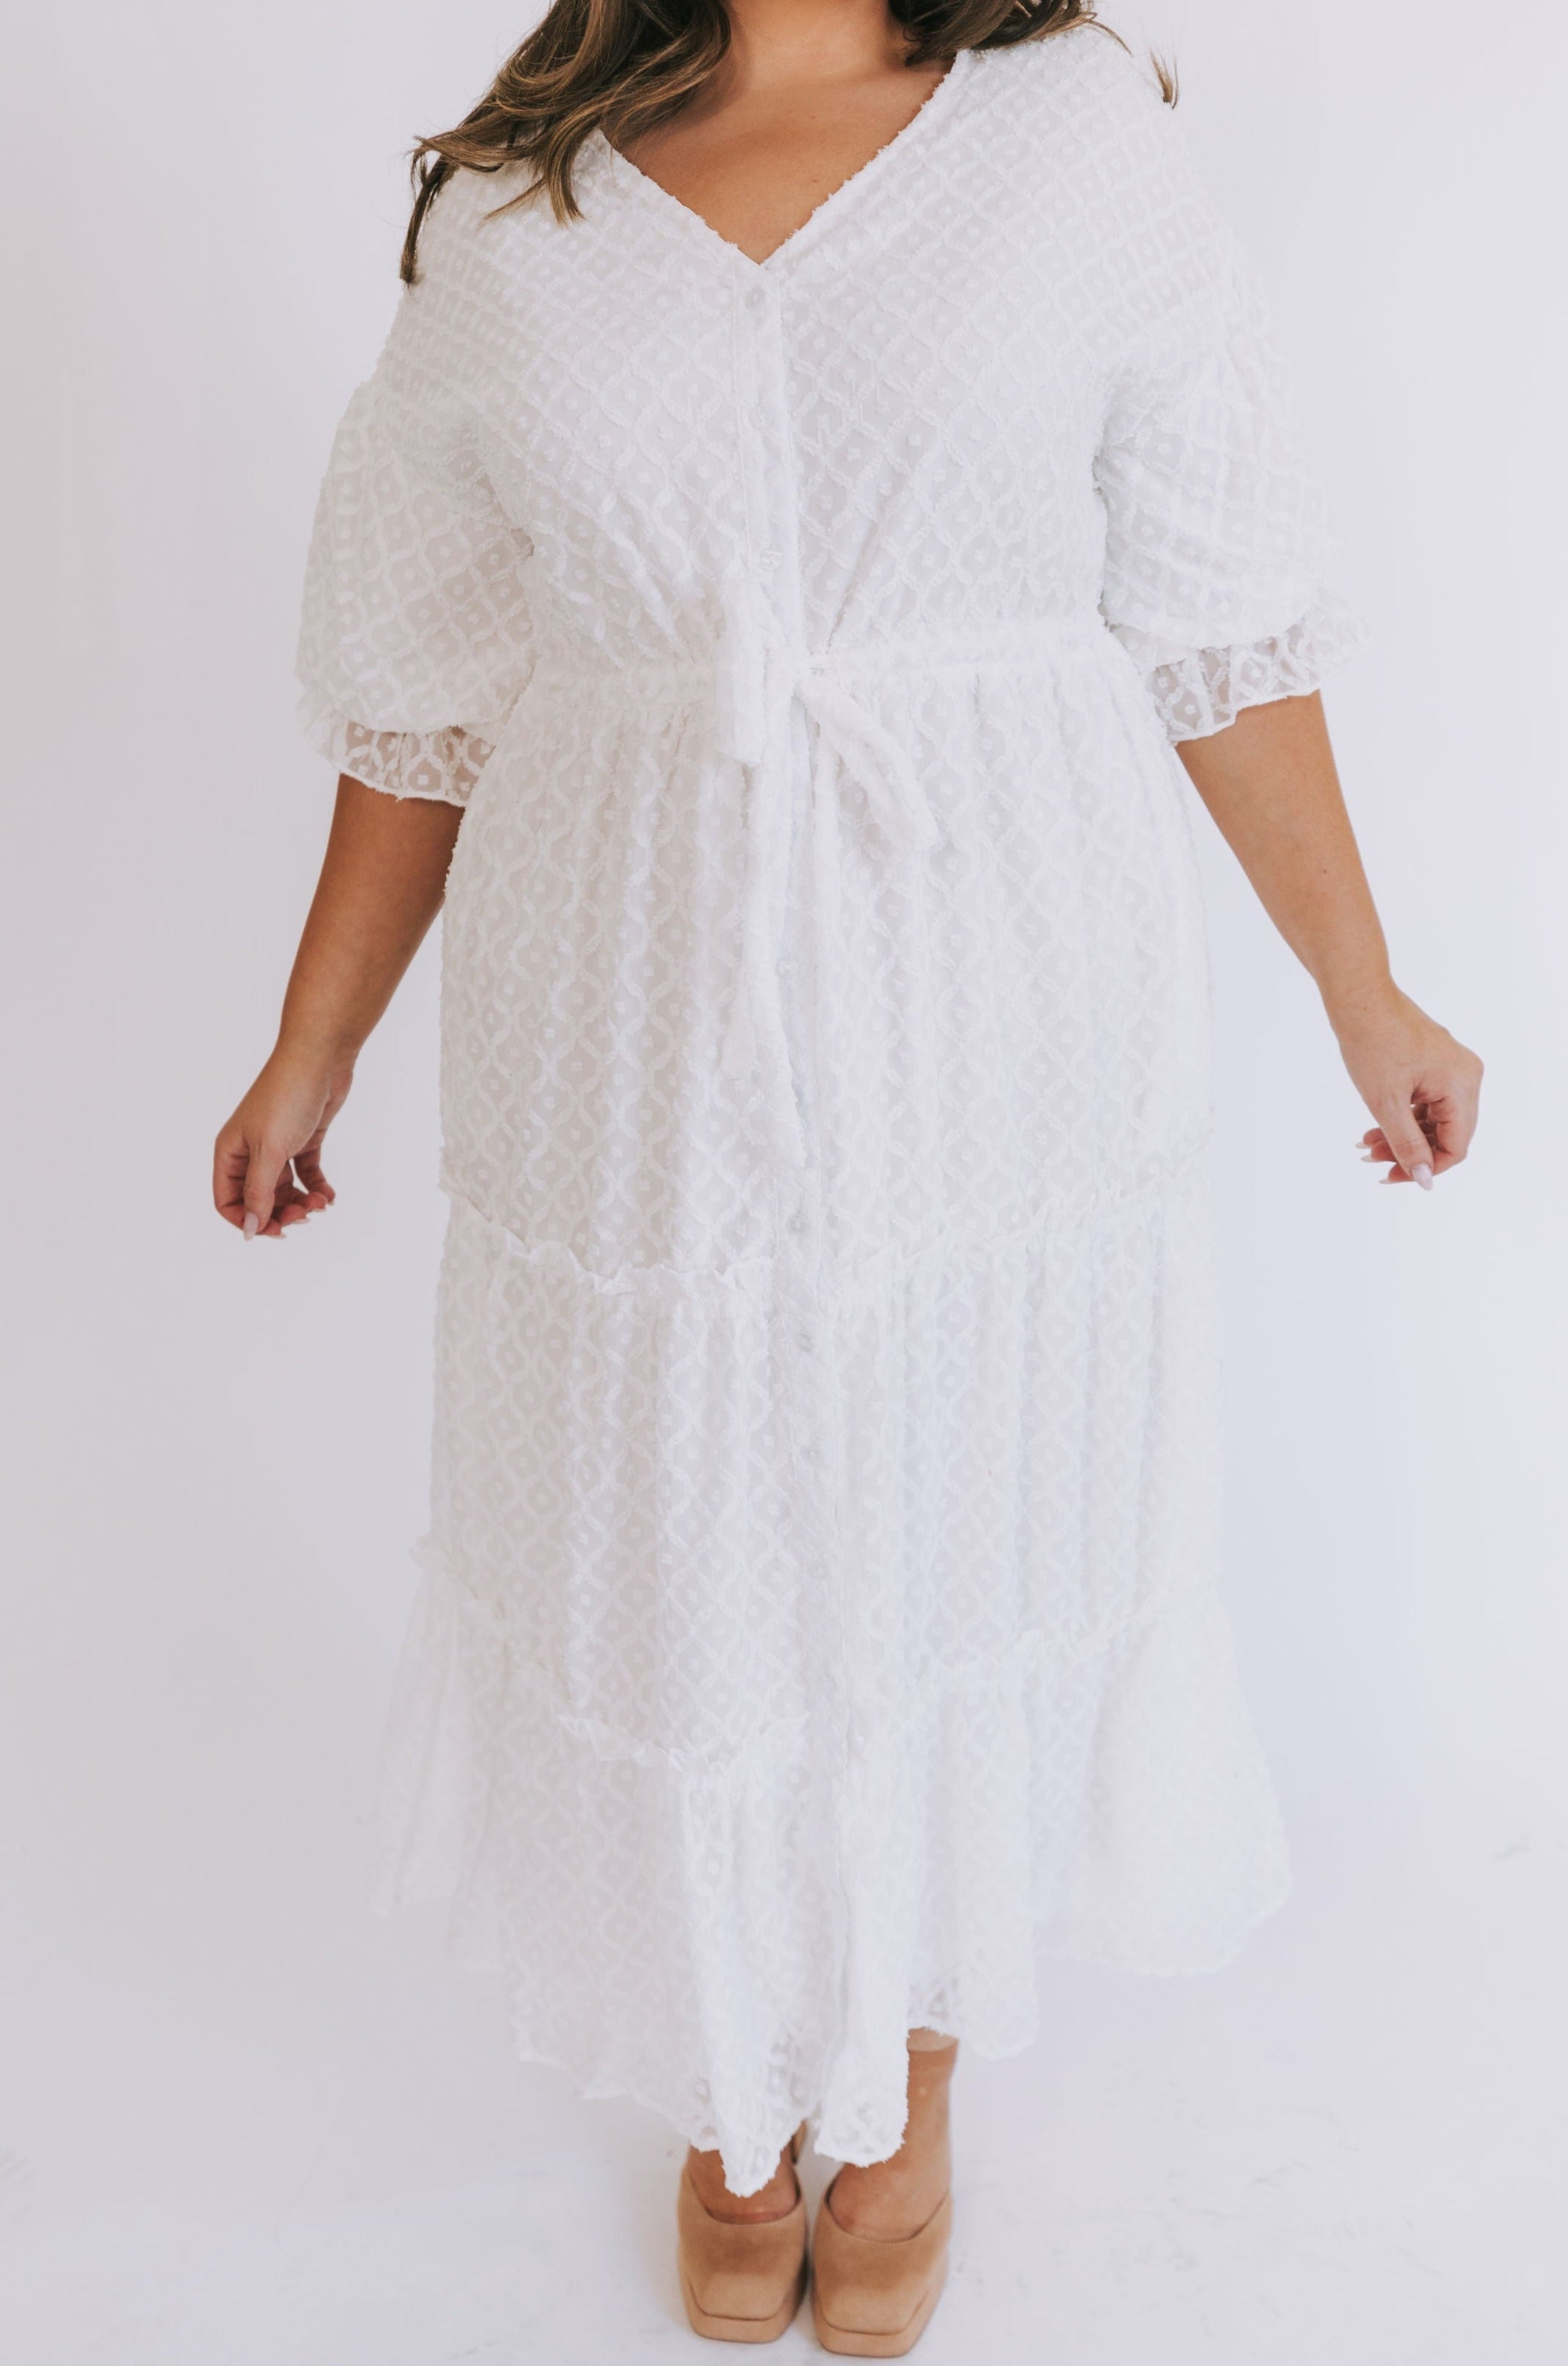 PLUS SIZE - Expect More Dress